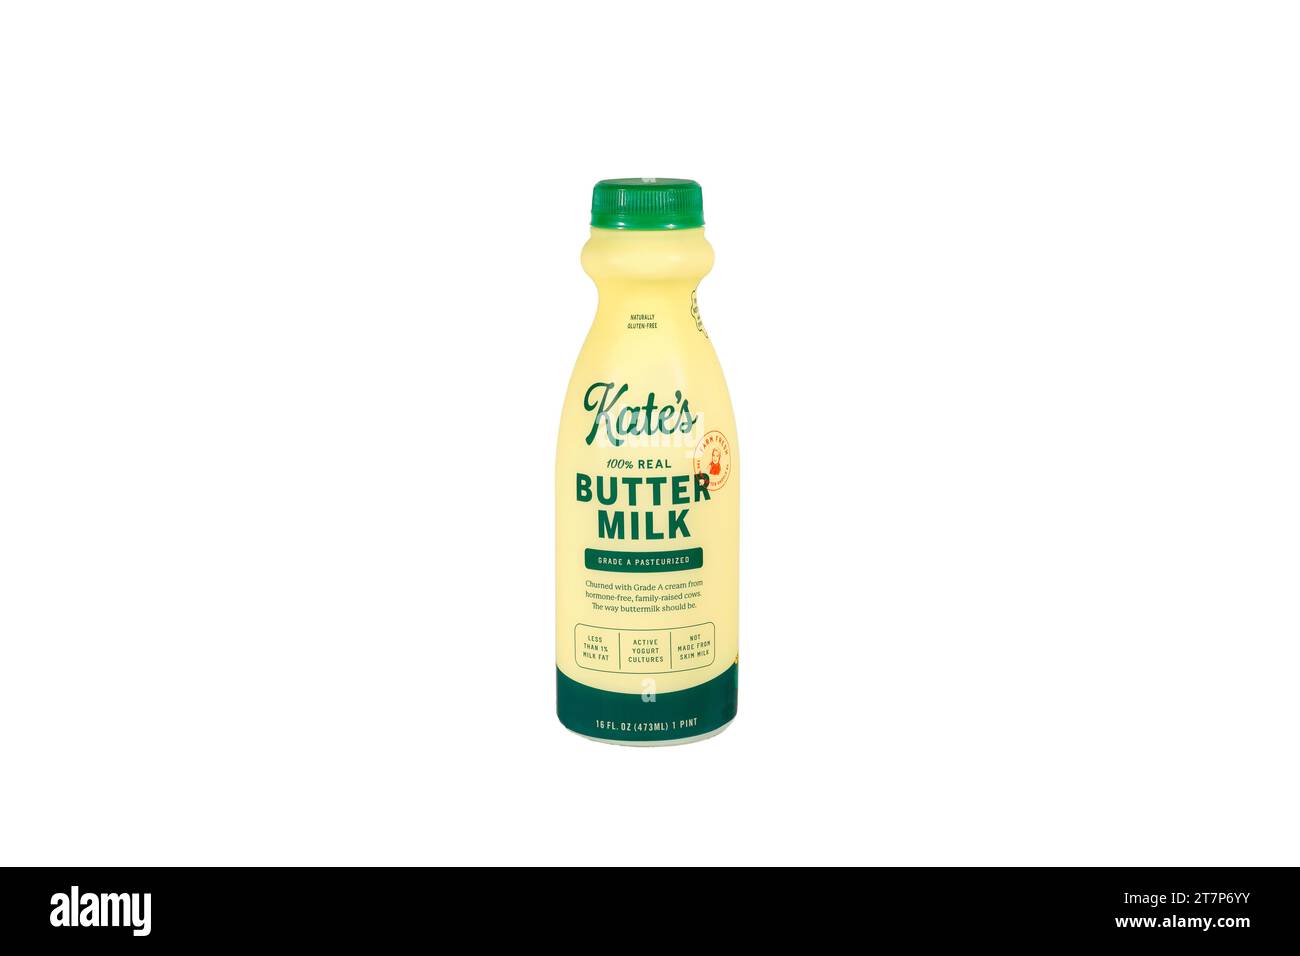 A bottle of Kate's 100% Real Buttermilk isolated on a white background. cutout image for illustration and editorial use. Stock Photo